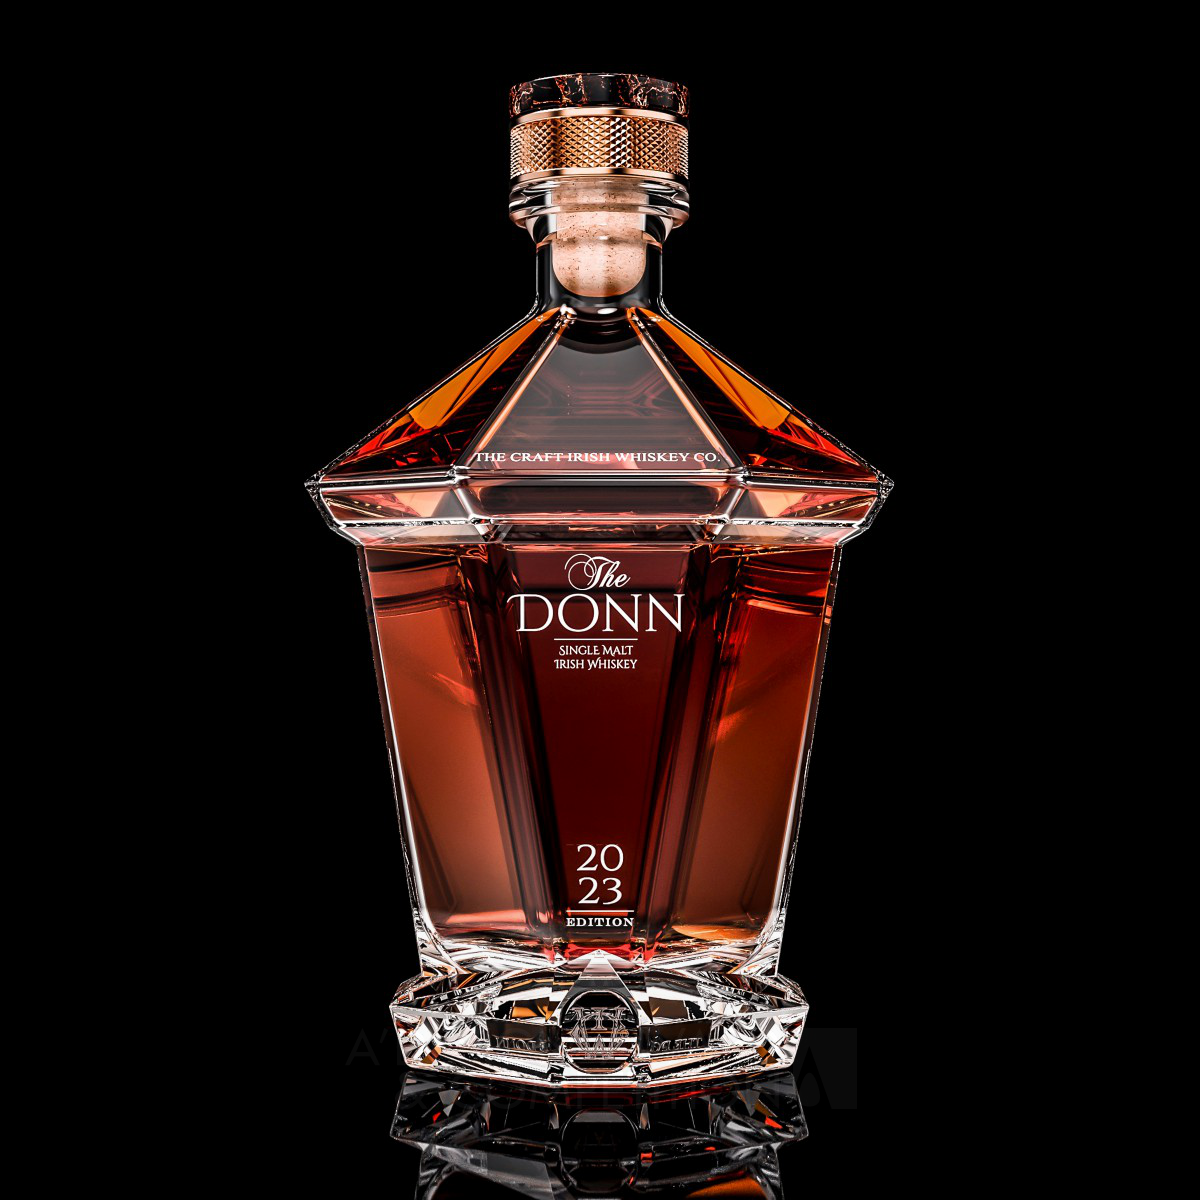 Unveiling The Donn: The Craft Irish Whiskey Co.'s Newest Retail Tailored Product